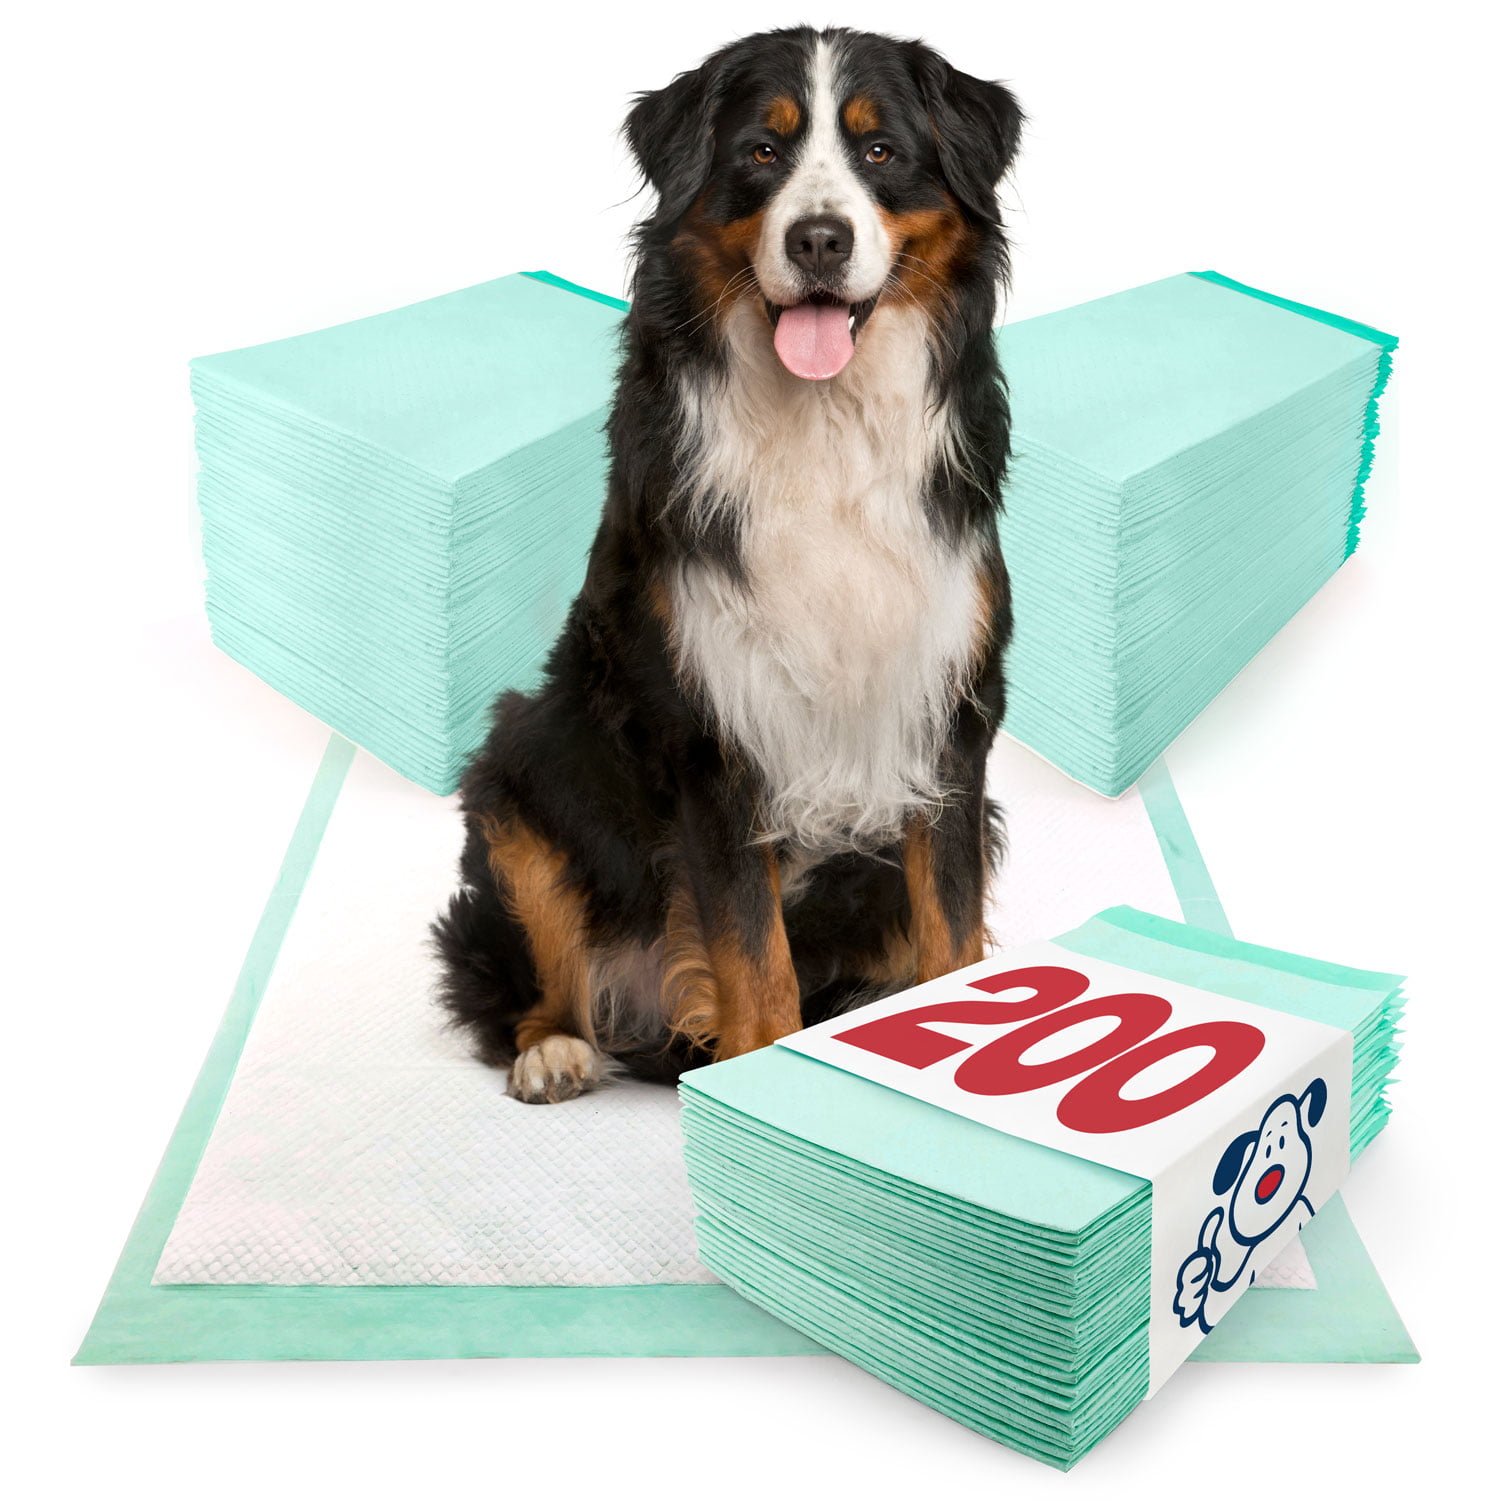 600-17x24" Economy Grade Puppy Piddle House Breaking Pee Pads 